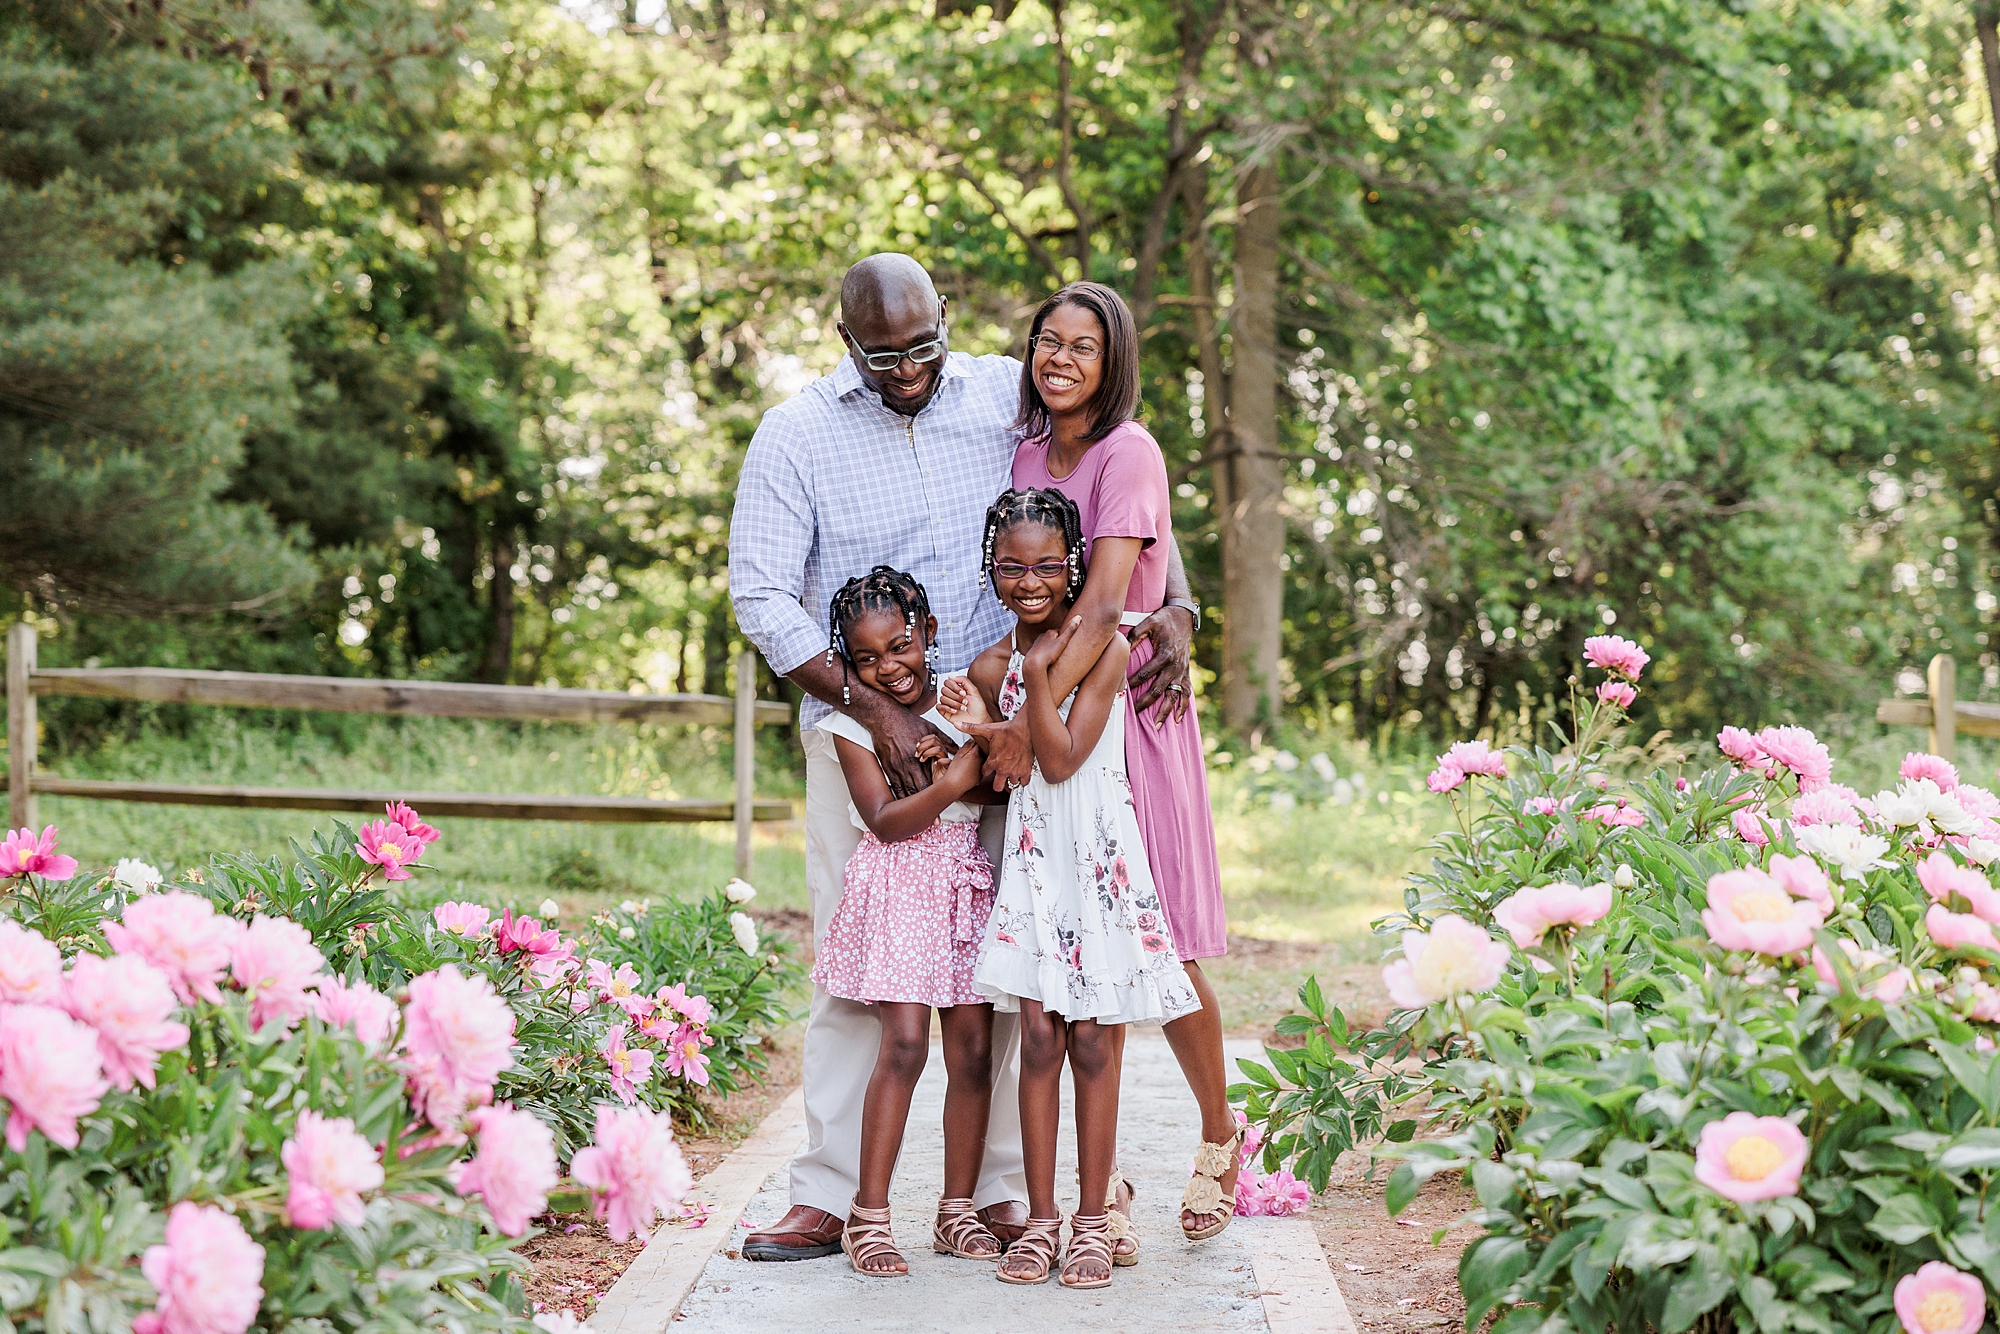 parents stand with daughters in pink and white dresses between rows of peonies